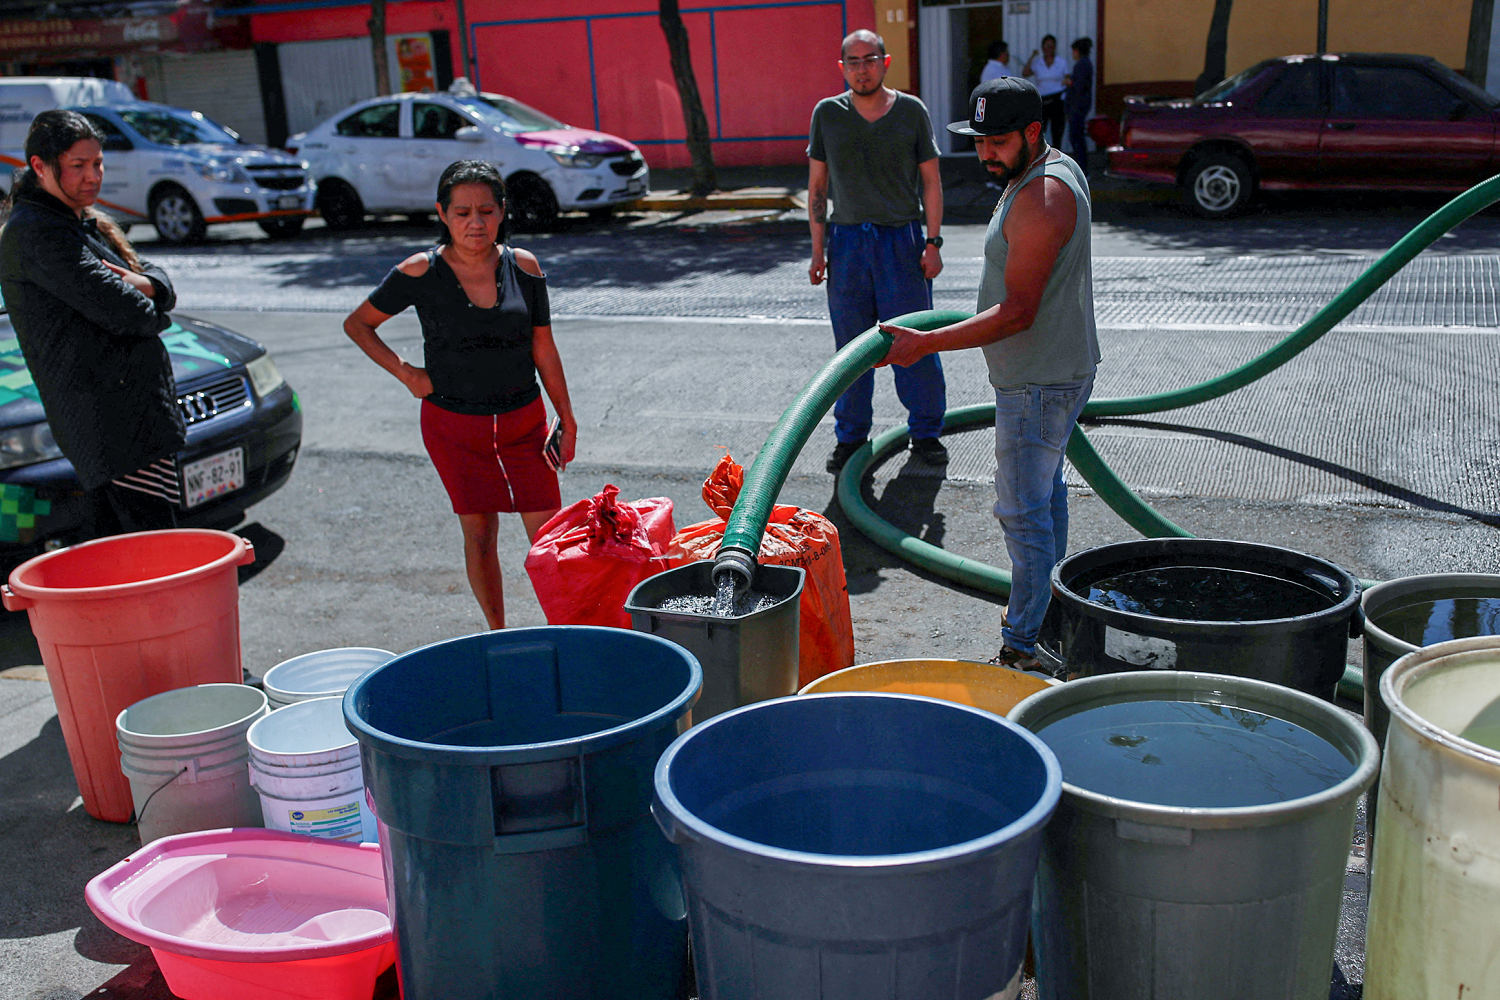 Mexico City's 21 million residents are facing a severe water shortage